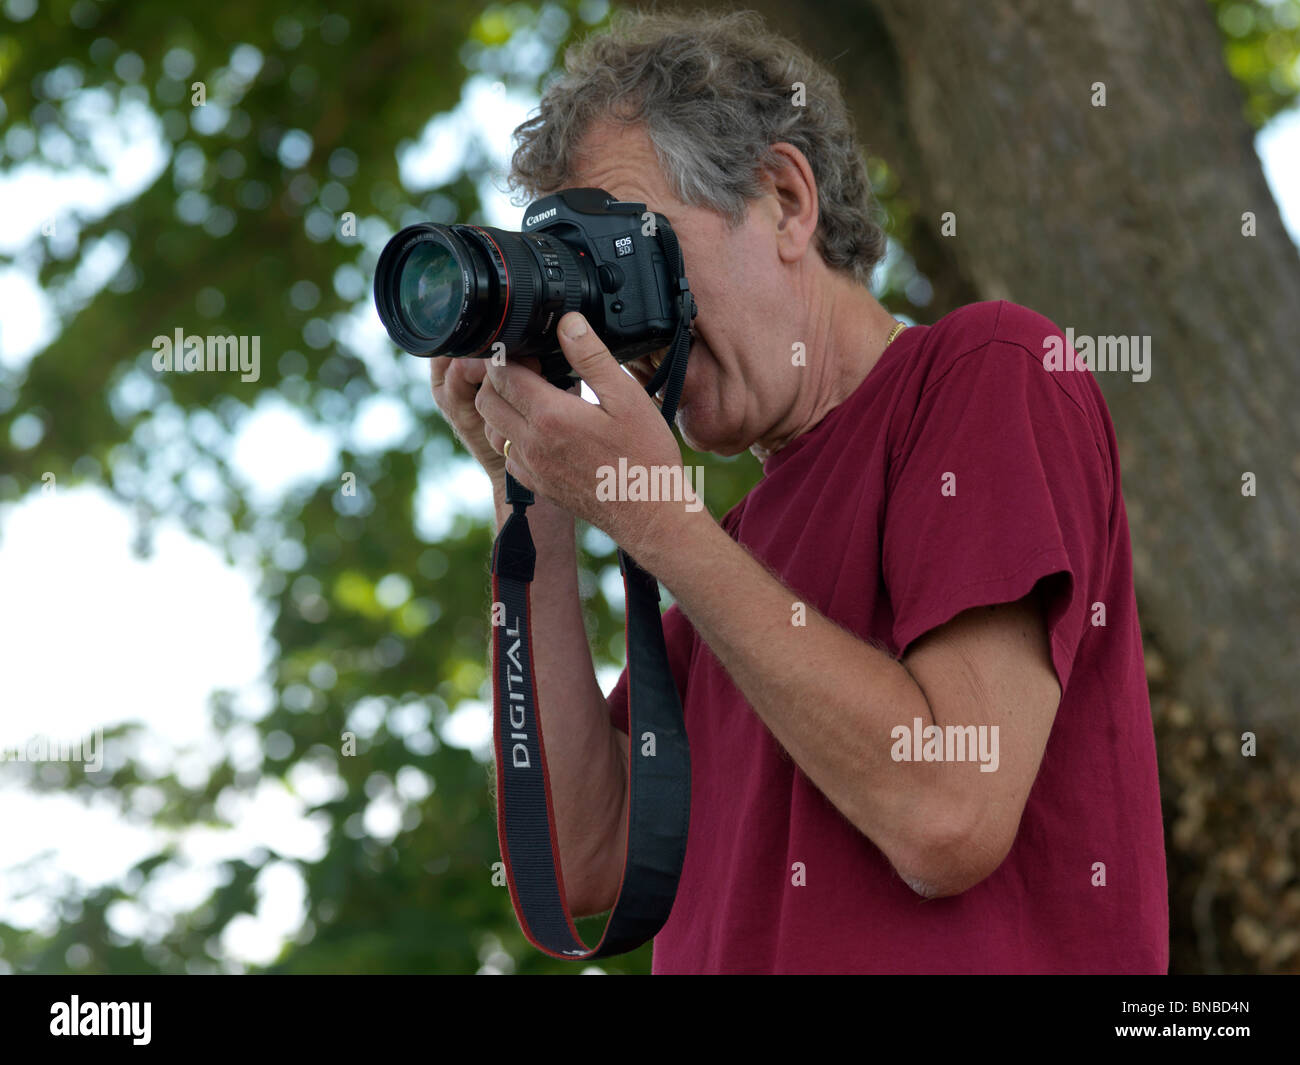 Professional Photographer taking pictures Stock Photo